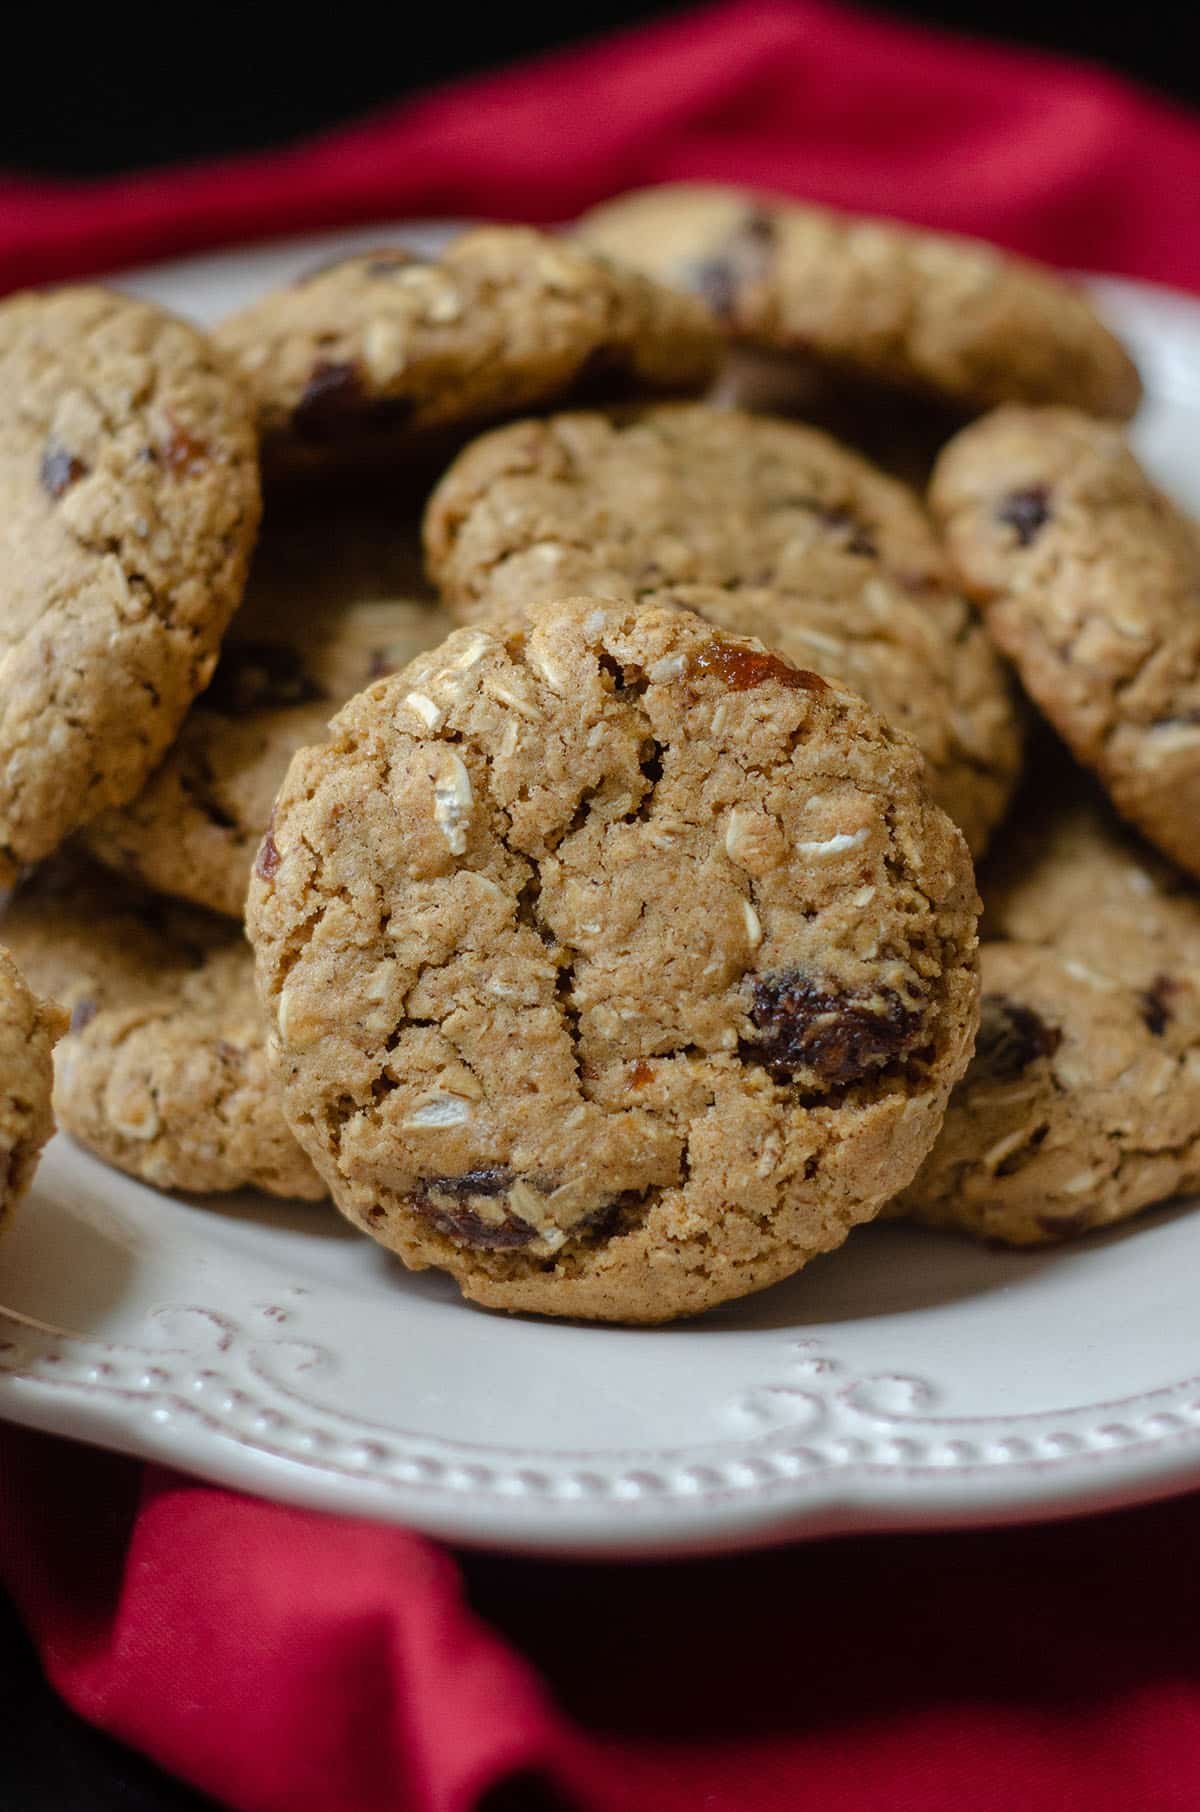 Chewy Oatmeal Raisin Cookies: These oatmeal raisin cookies are chewy, buttery, and sweetened with brown sugar and molasses.